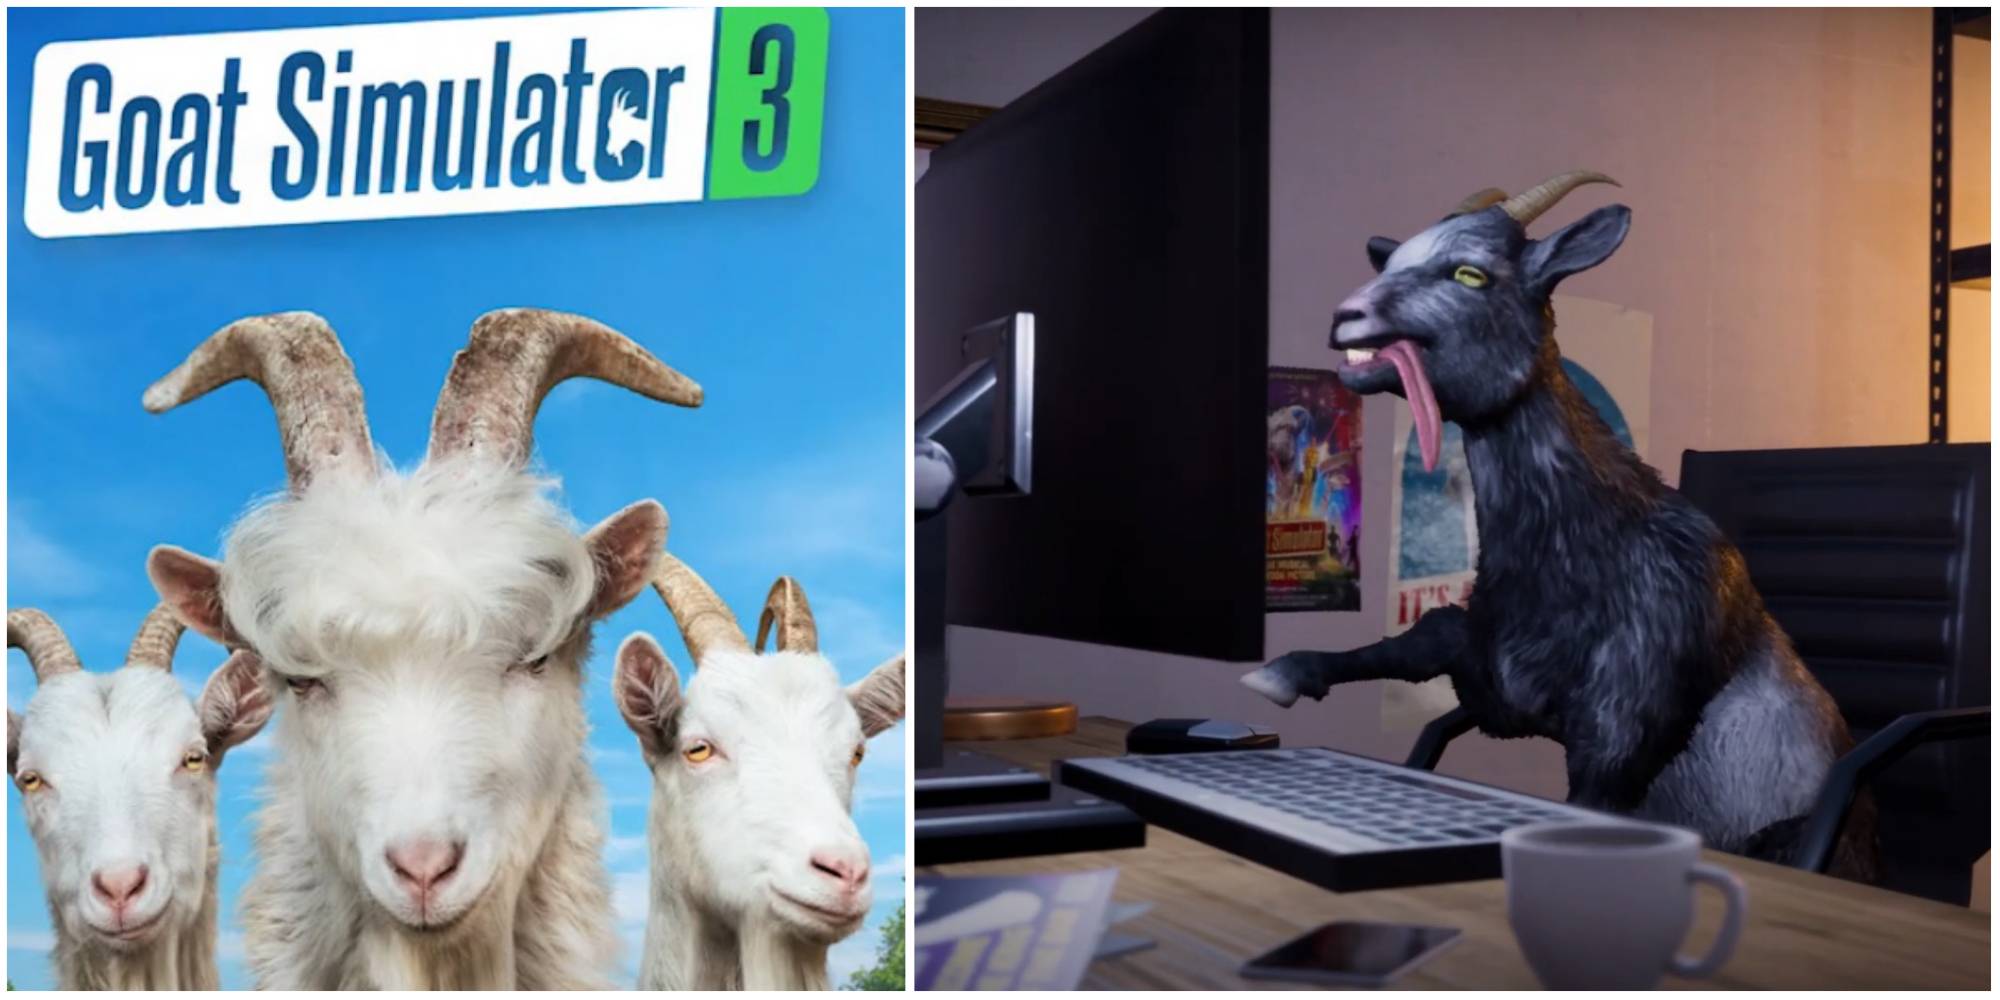 How to get the whale in goat simulator